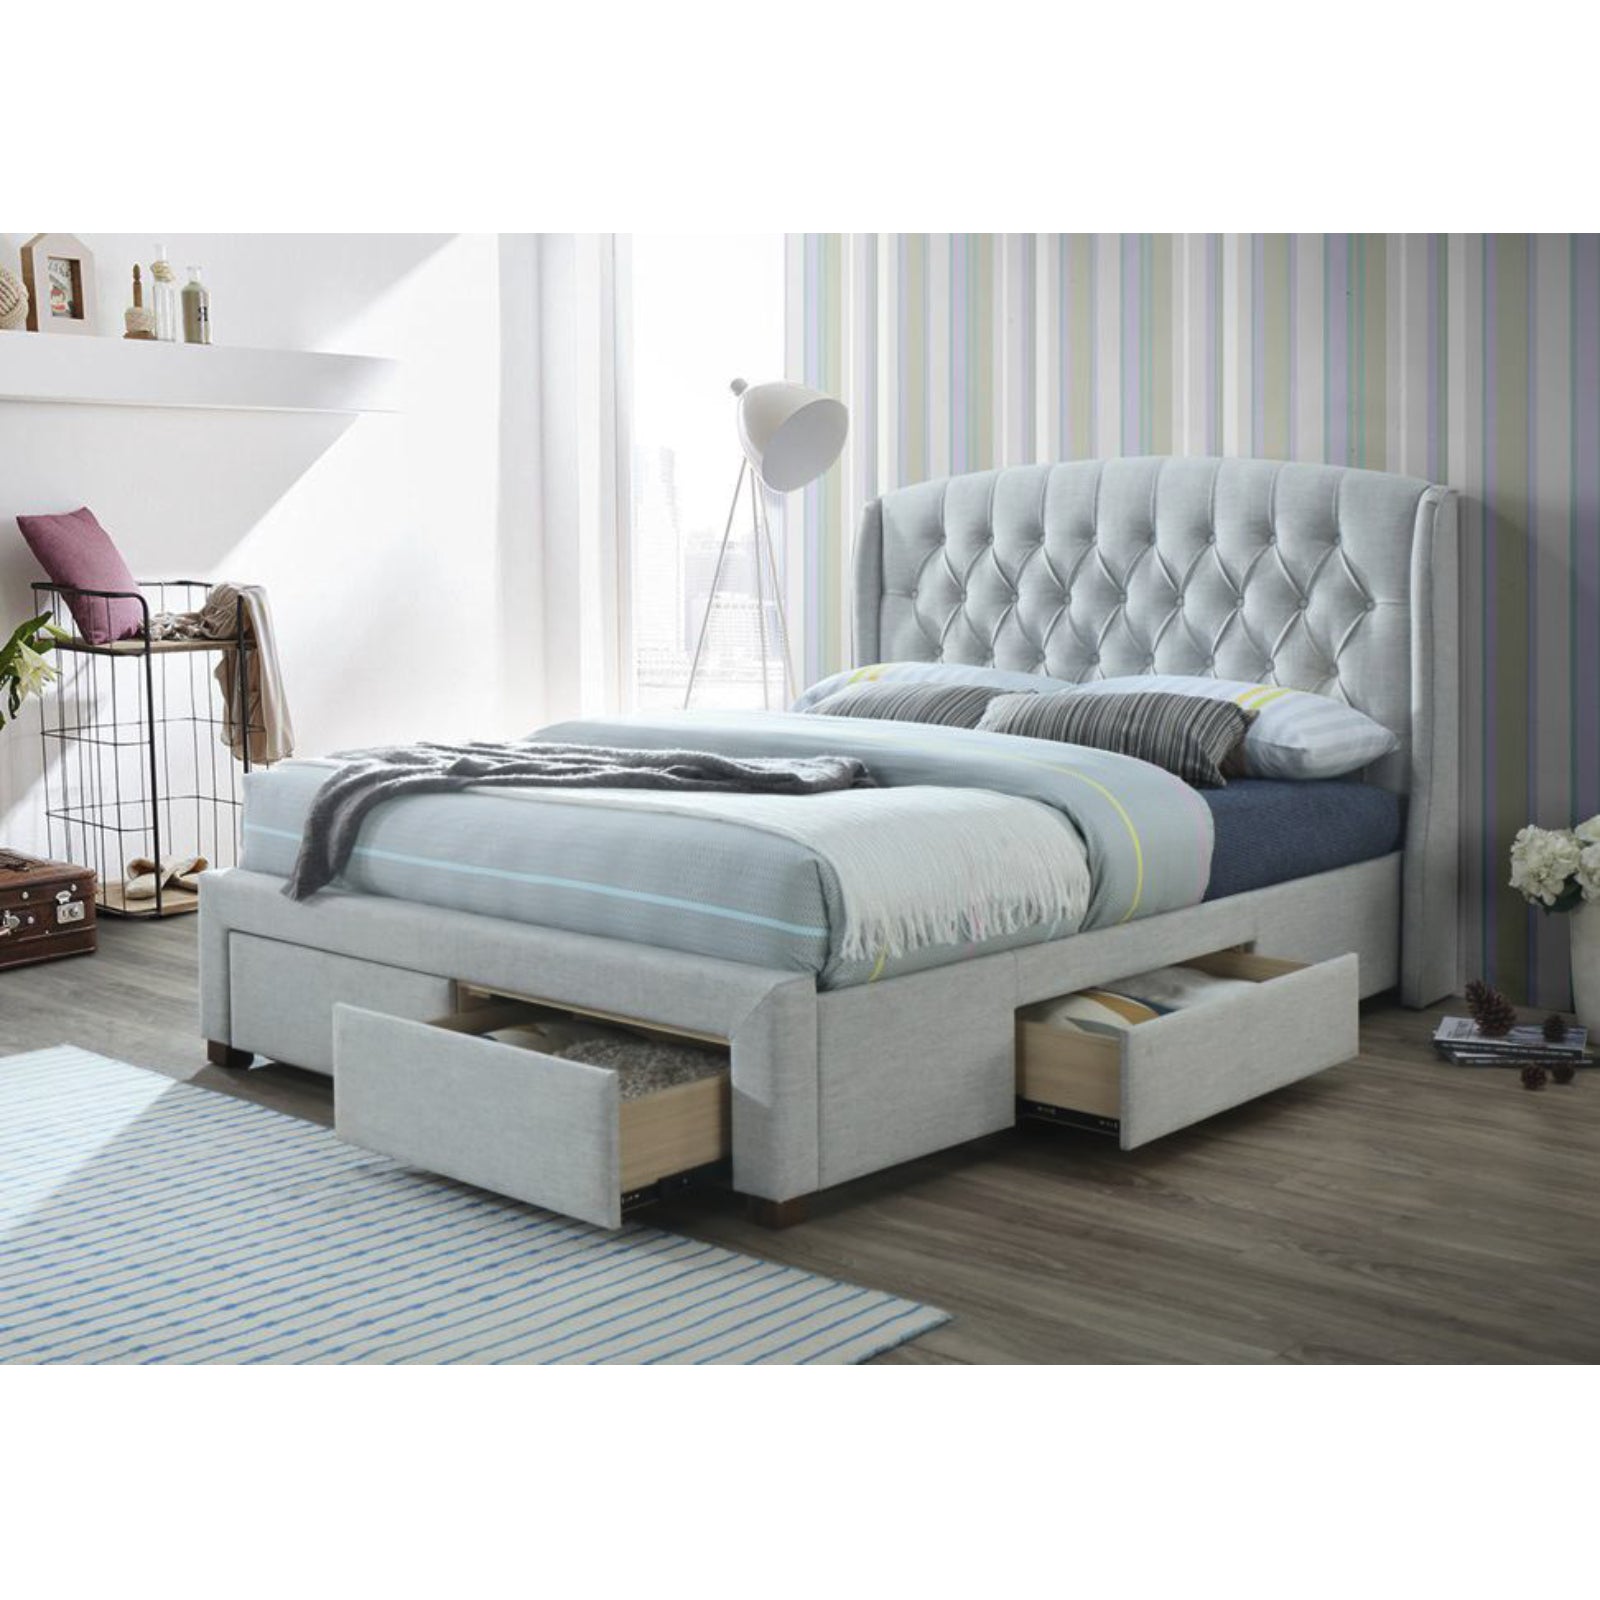 Back In Stock! Queen Size Bed Frame With Storage Drawers Timber Base  - Beige